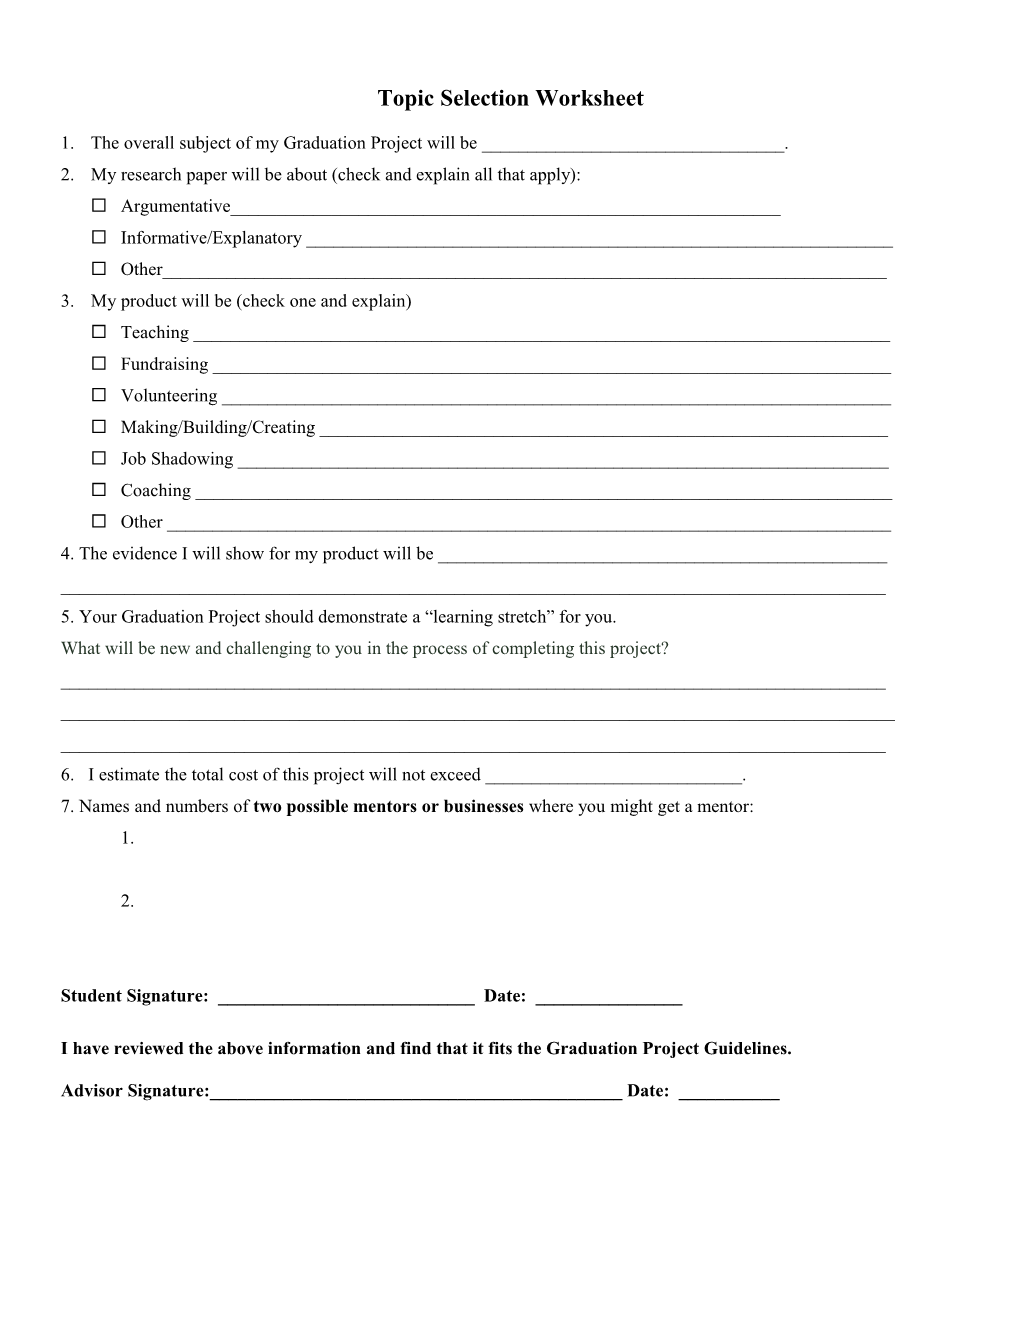 Topic Selection Worksheet